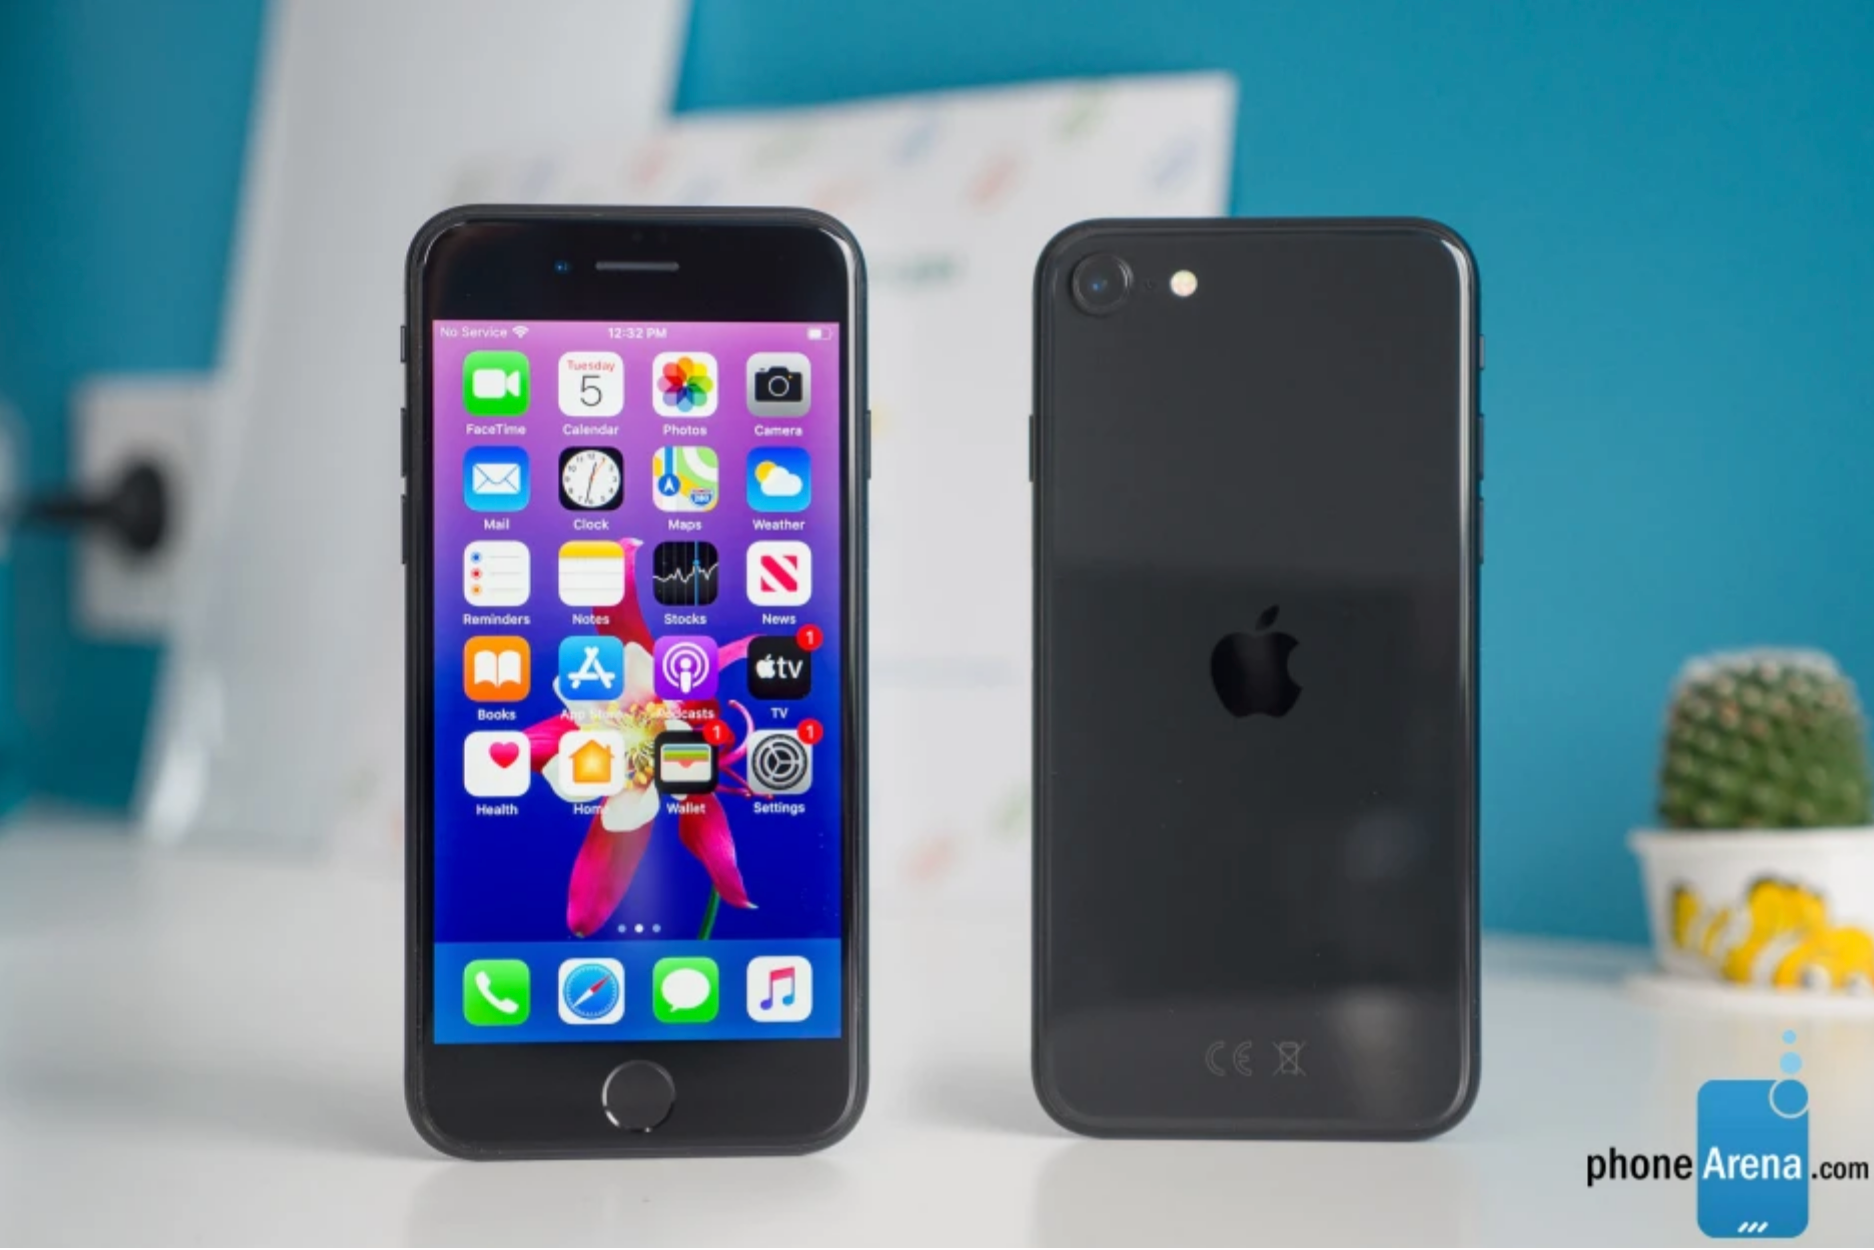 Apple iPhone history: the evolution of the smartphone that started it all